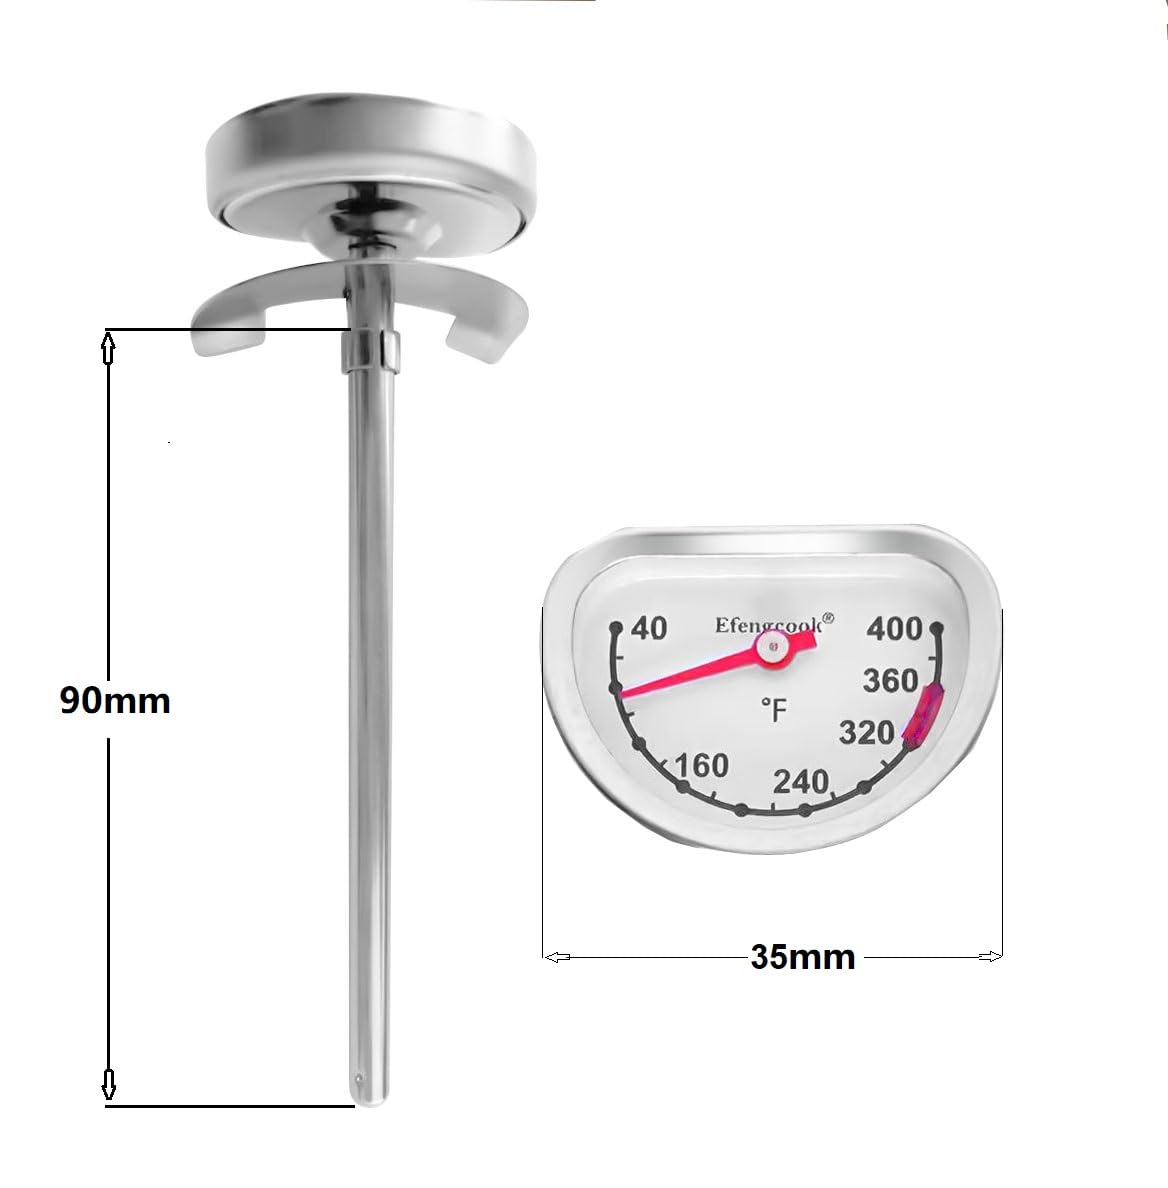 Candy Thermometer Deep Fryer Oil Thermometer (2 Pack with Clip  8“ Probe - Best Cooking Thermometer for Cooking Tall pots,Candle Making, Candy Making,Deep Frying